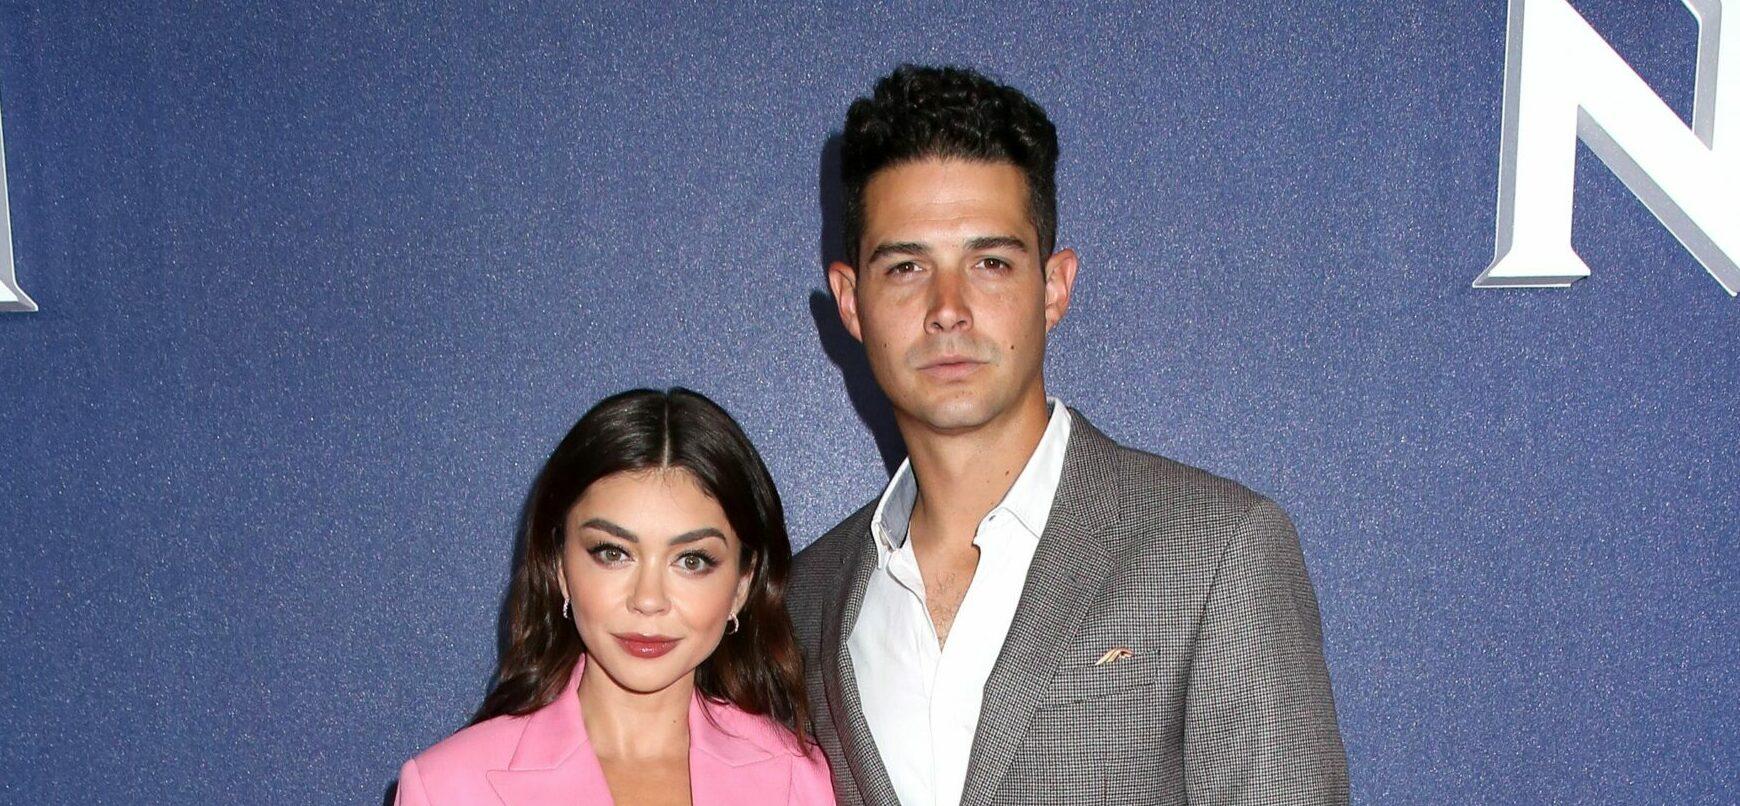 Sarah Hyland Is A Toned Barbie For Summer In Vacation Pics Featuring Husband Wells Adams